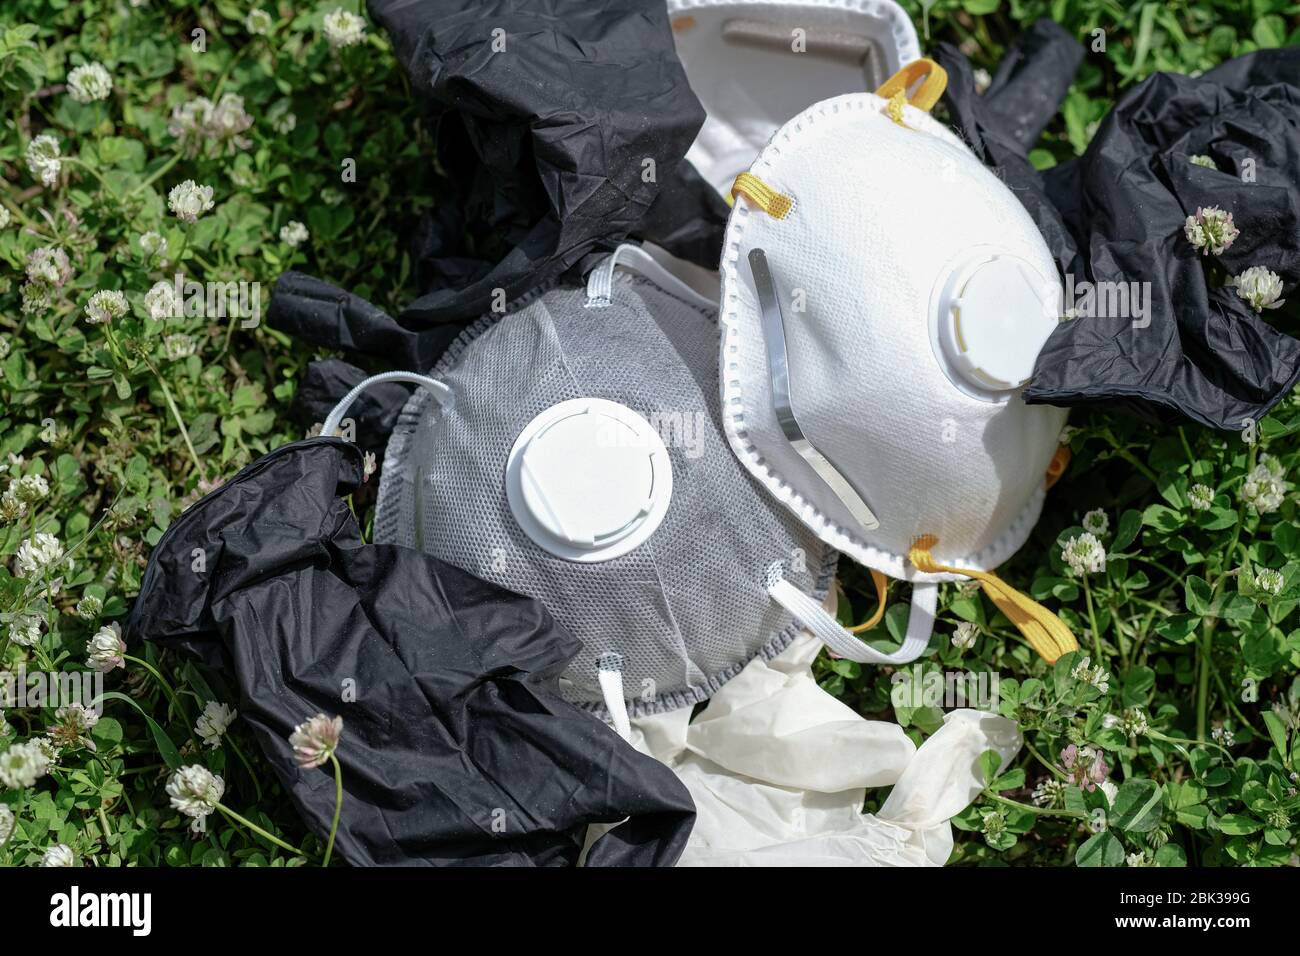 Ffp2 protective mask and gloves refuse trash on grass meadow ground.covid coronavirus disease garbage pollution Stock Photo